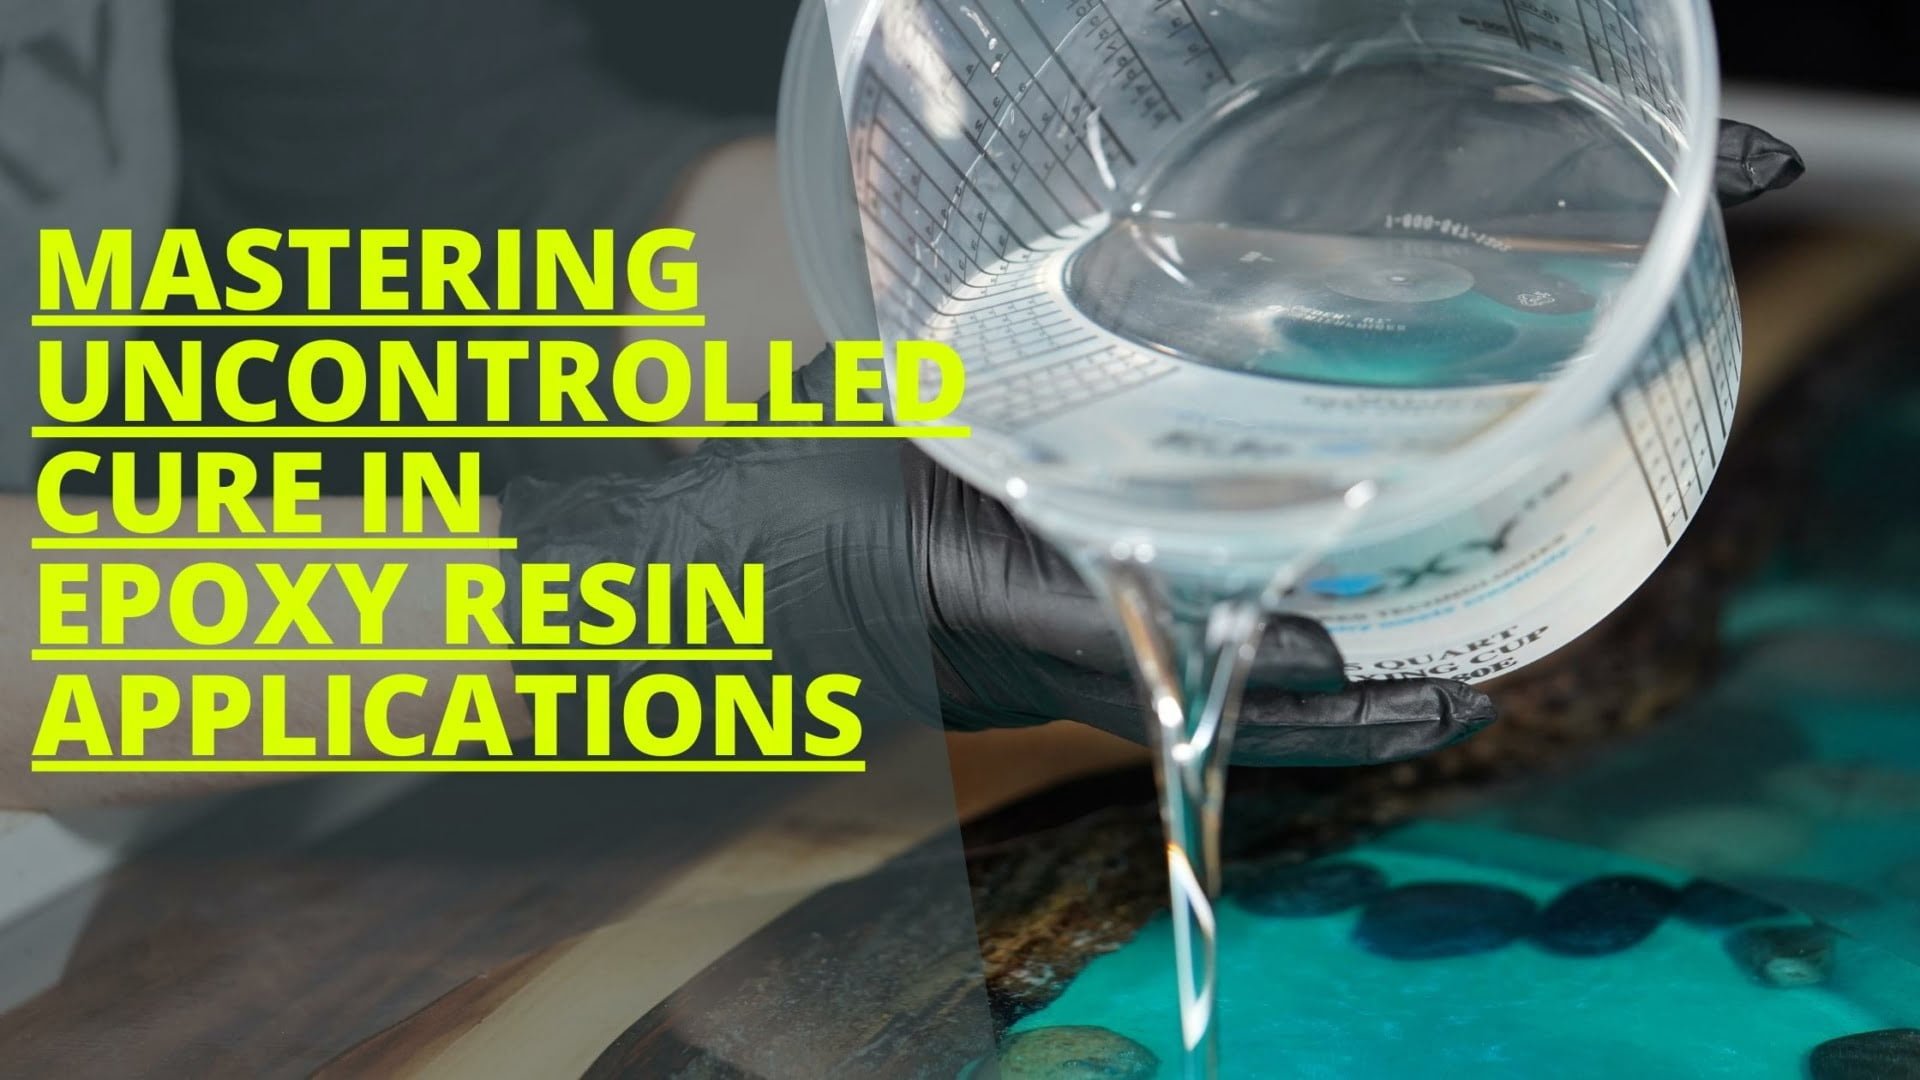 Epoxy Resin Curing Process: Tips and Tricks for Optimal Results